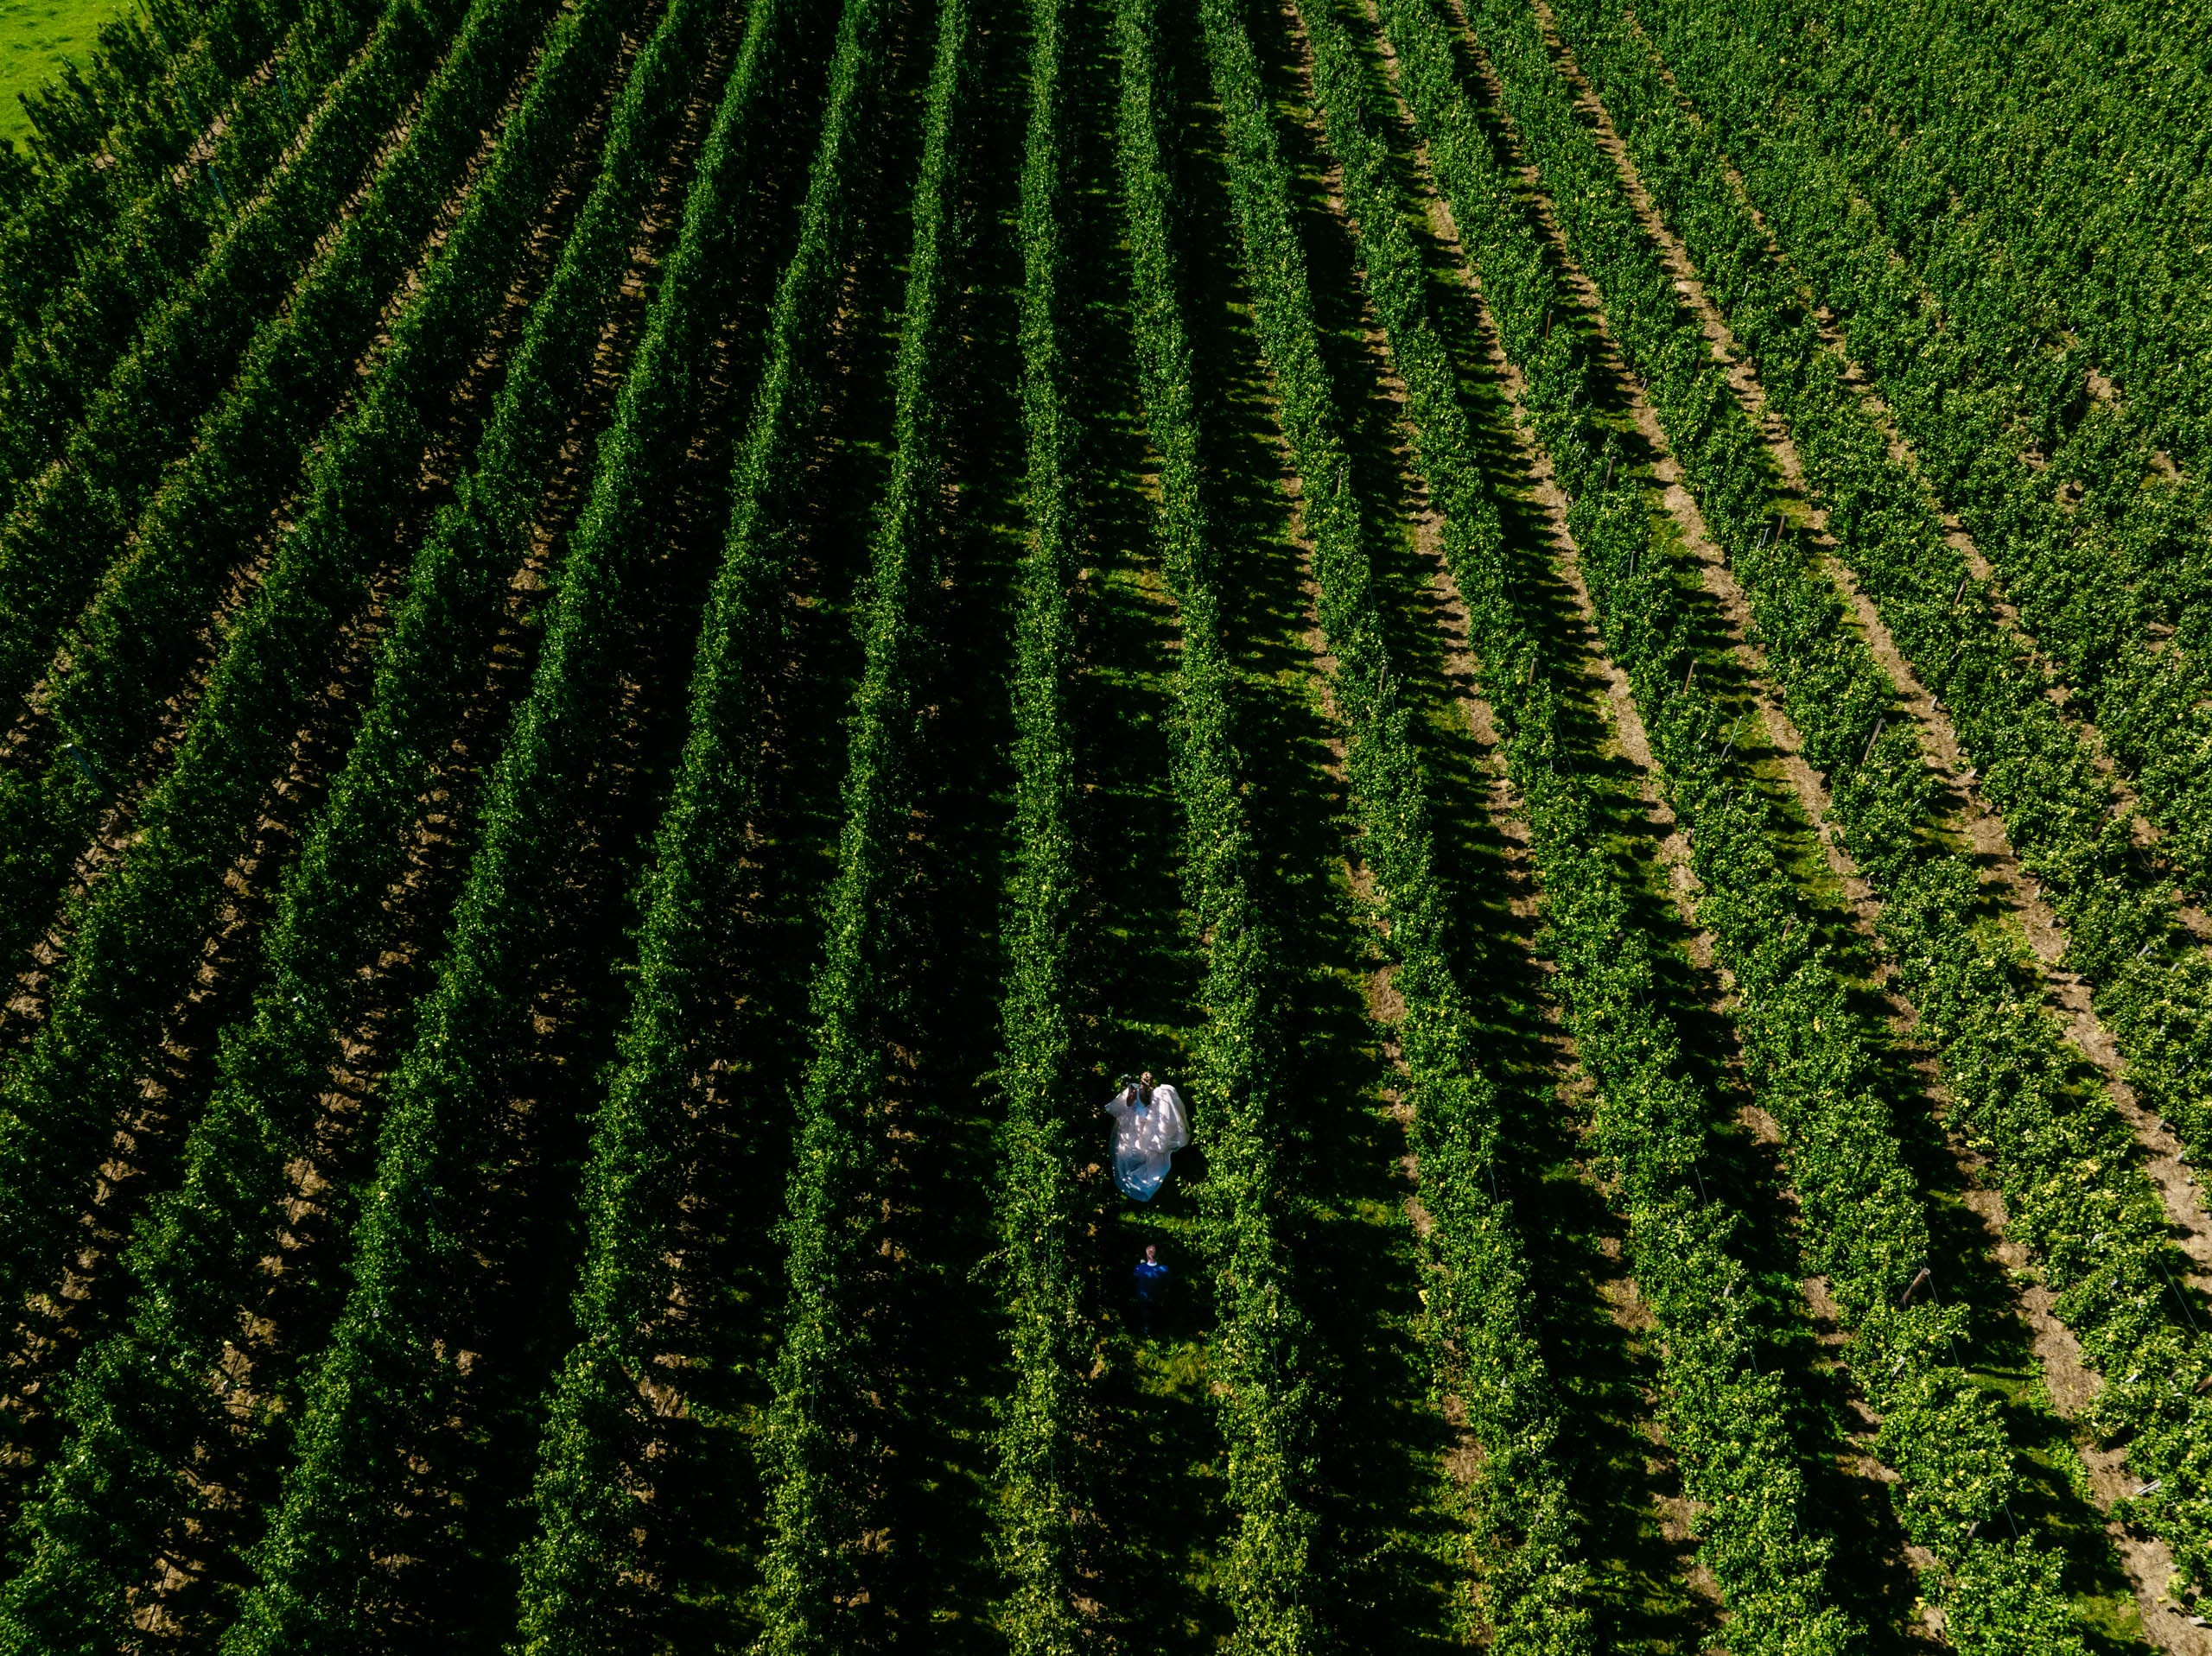 An aerial view of a person walking through a field of trees taking special wedding photos.